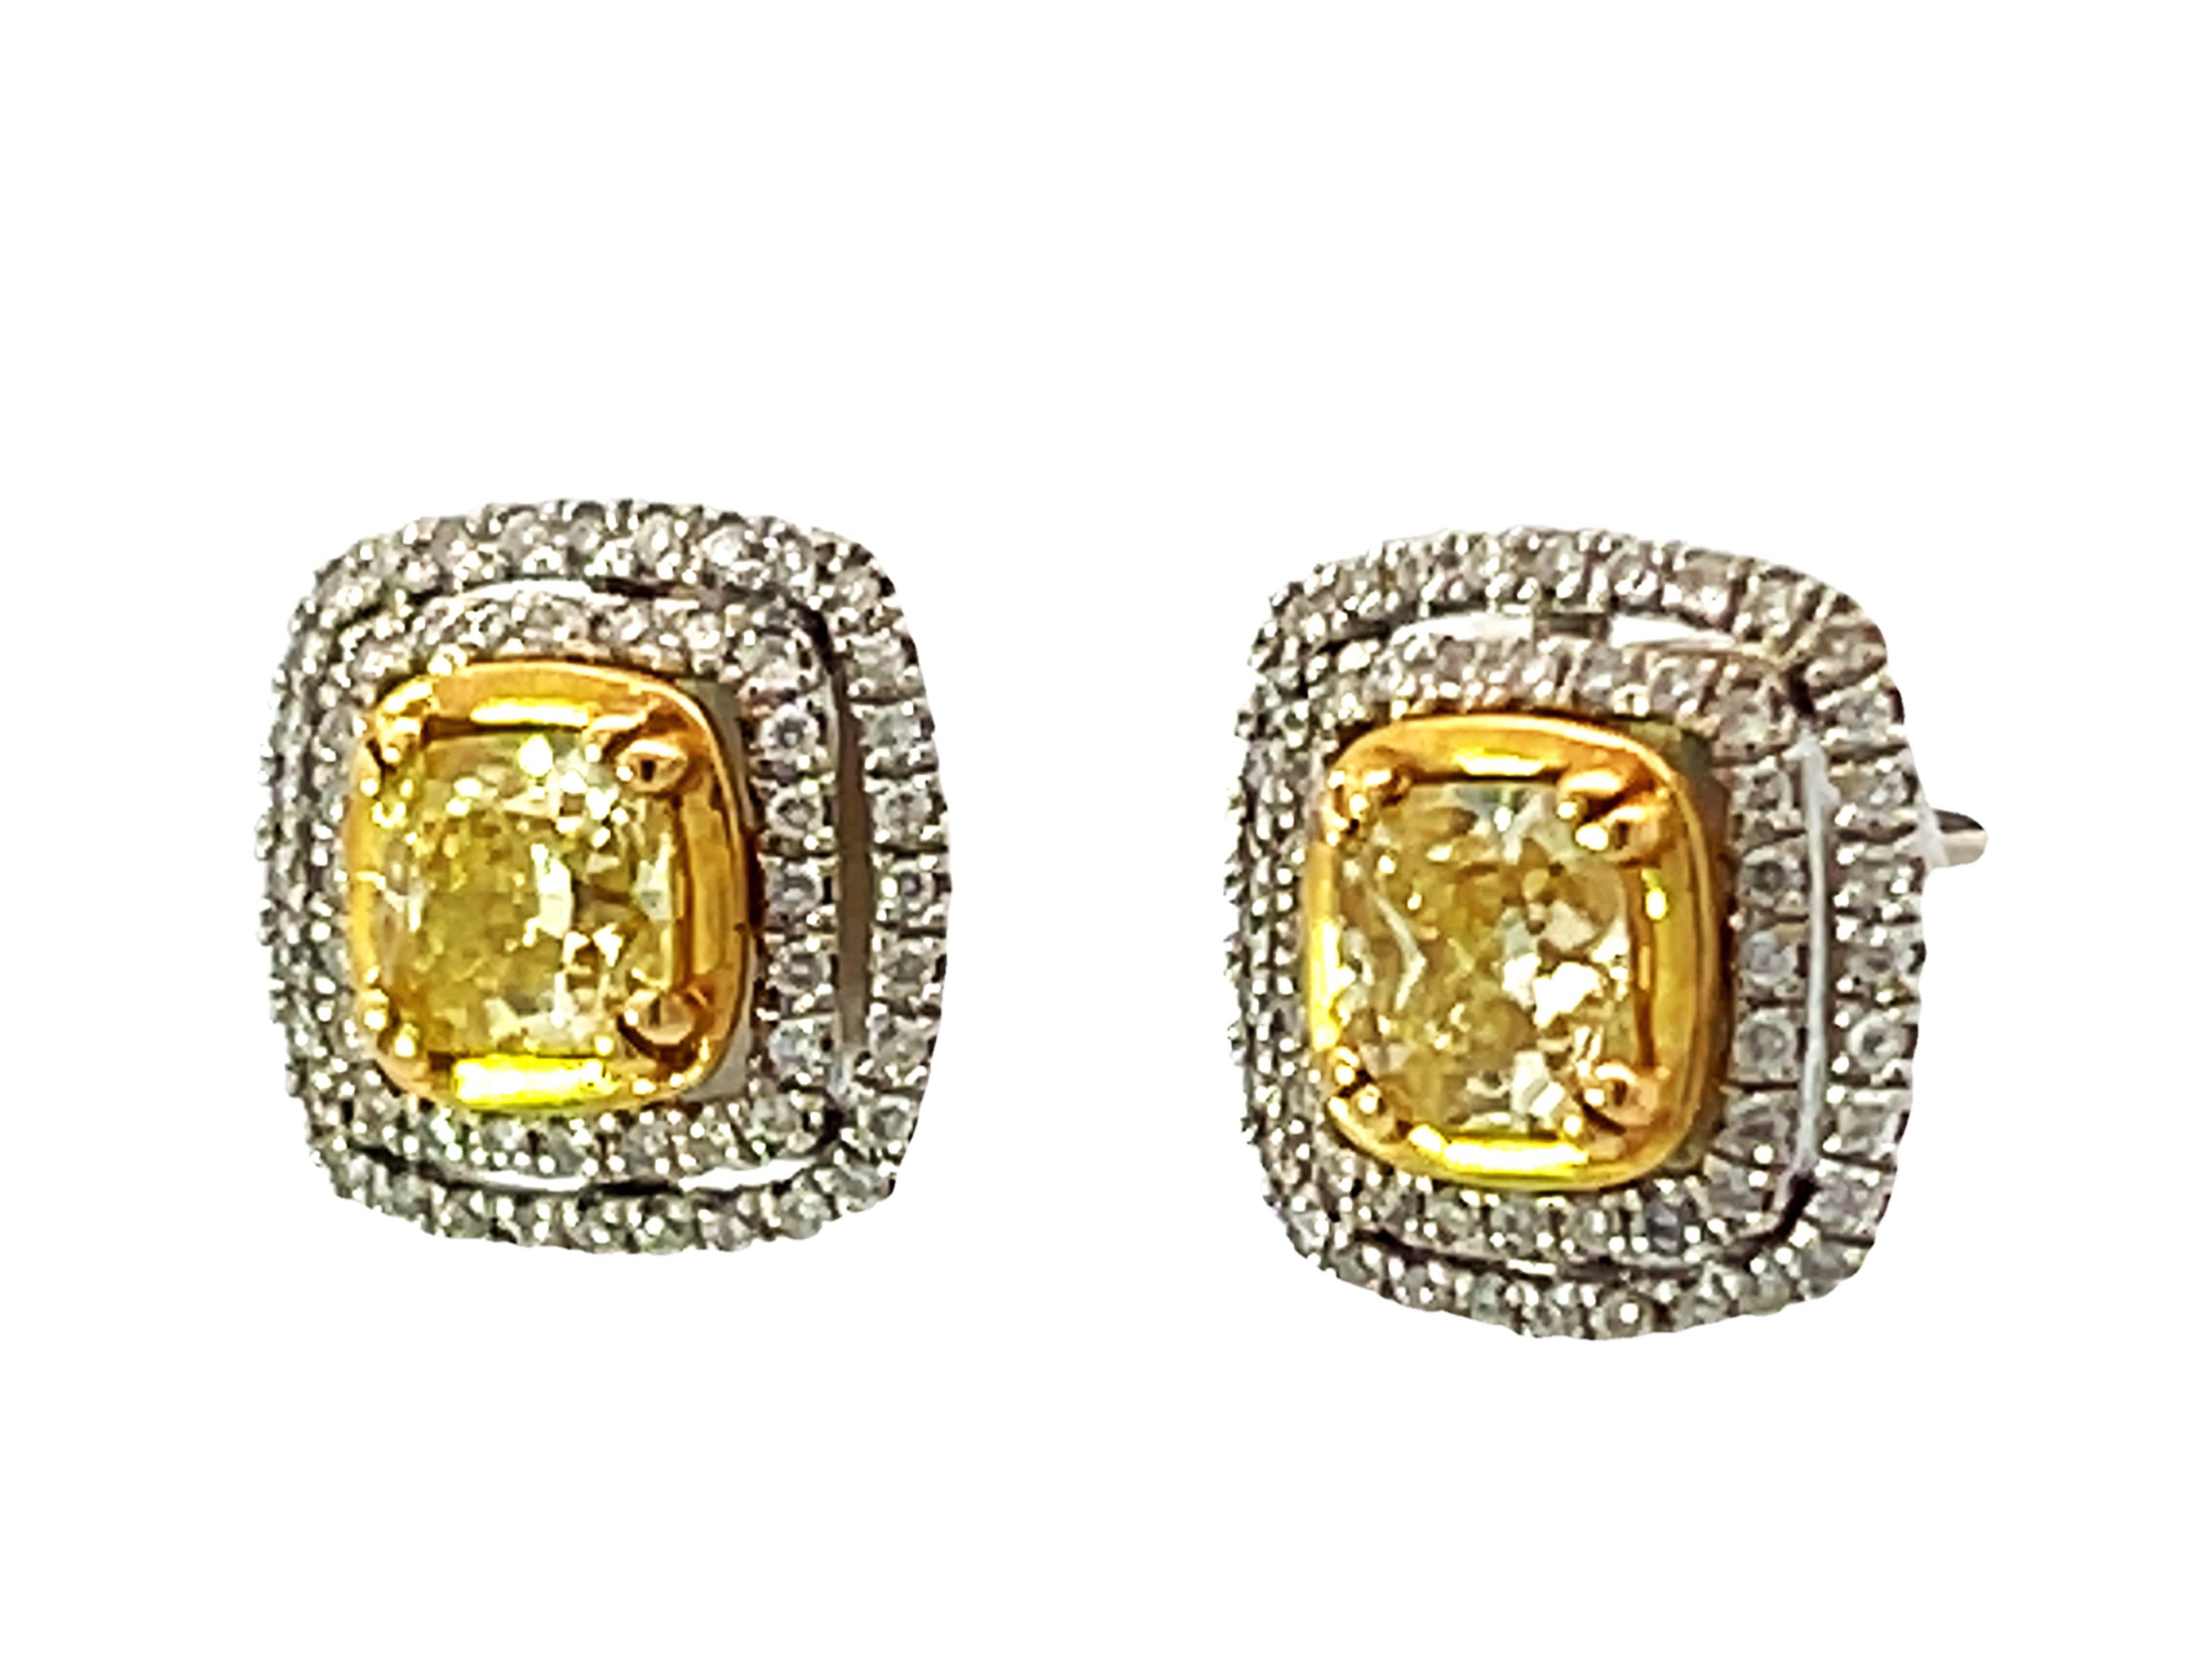 Fancy Yellow Cushion Cut Diamond Earrings with Double Diamond Halo 18k Gold In Excellent Condition For Sale In Honolulu, HI